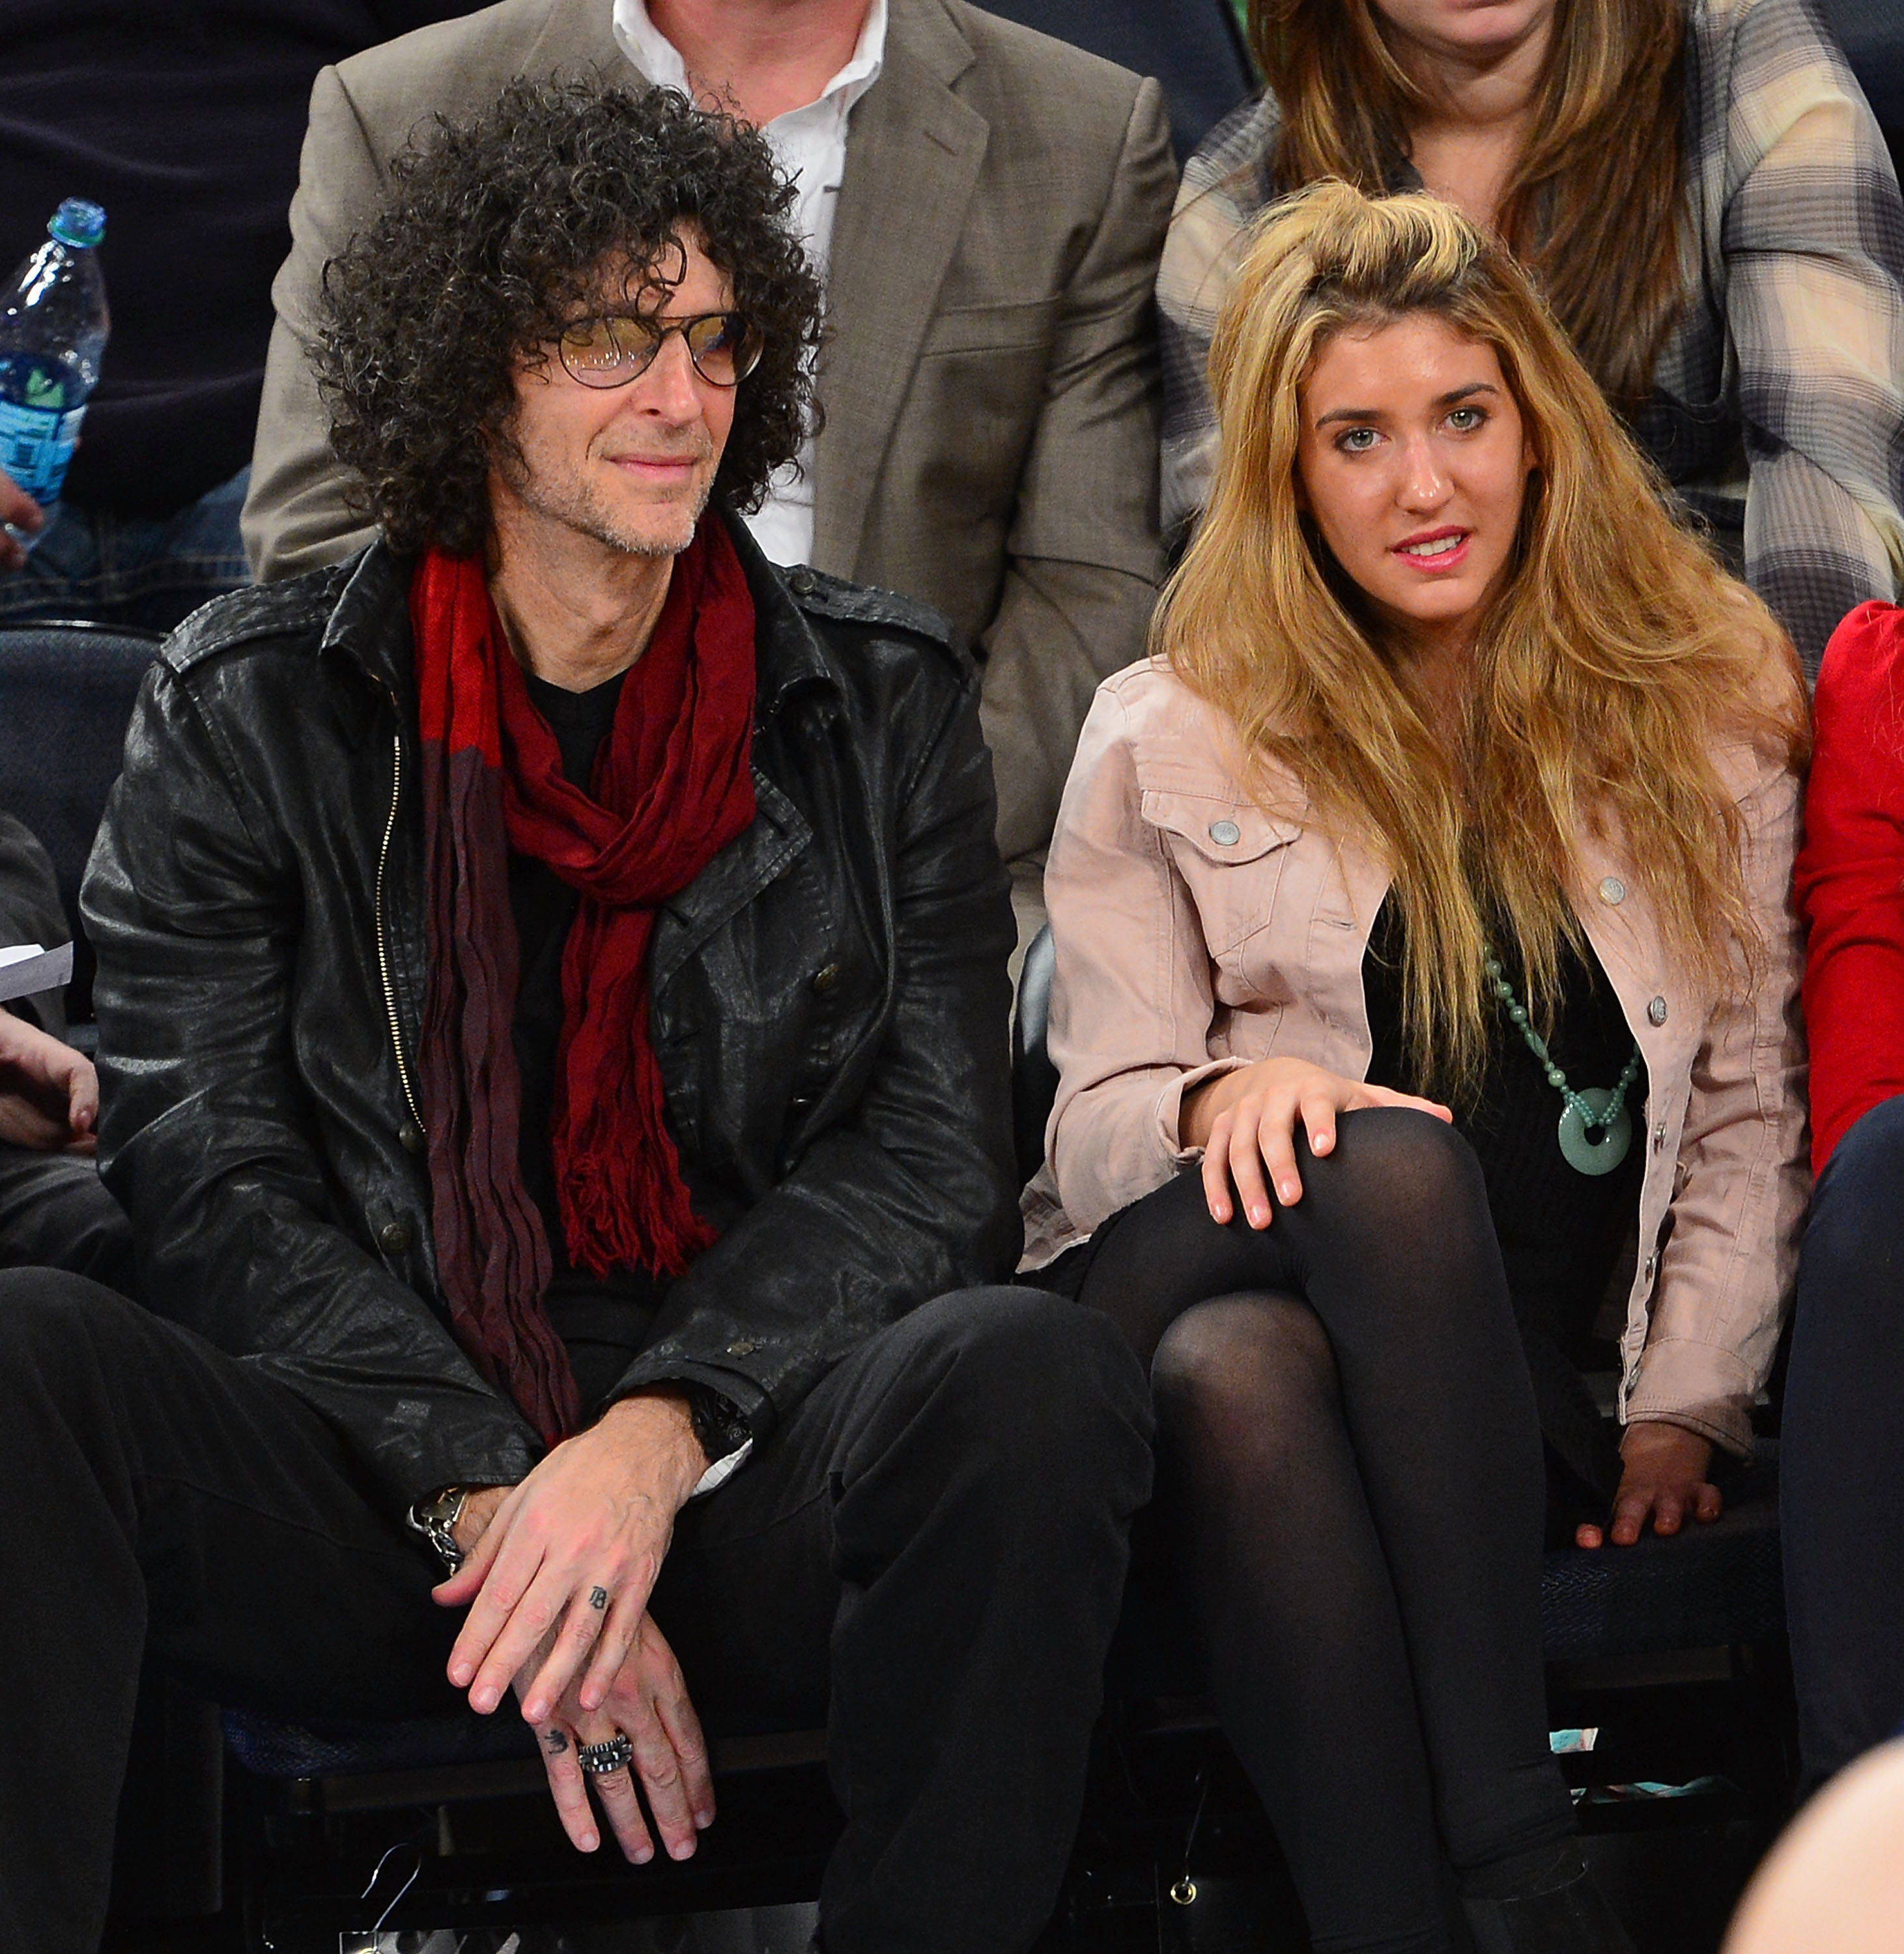 the two sitting courtside at a game